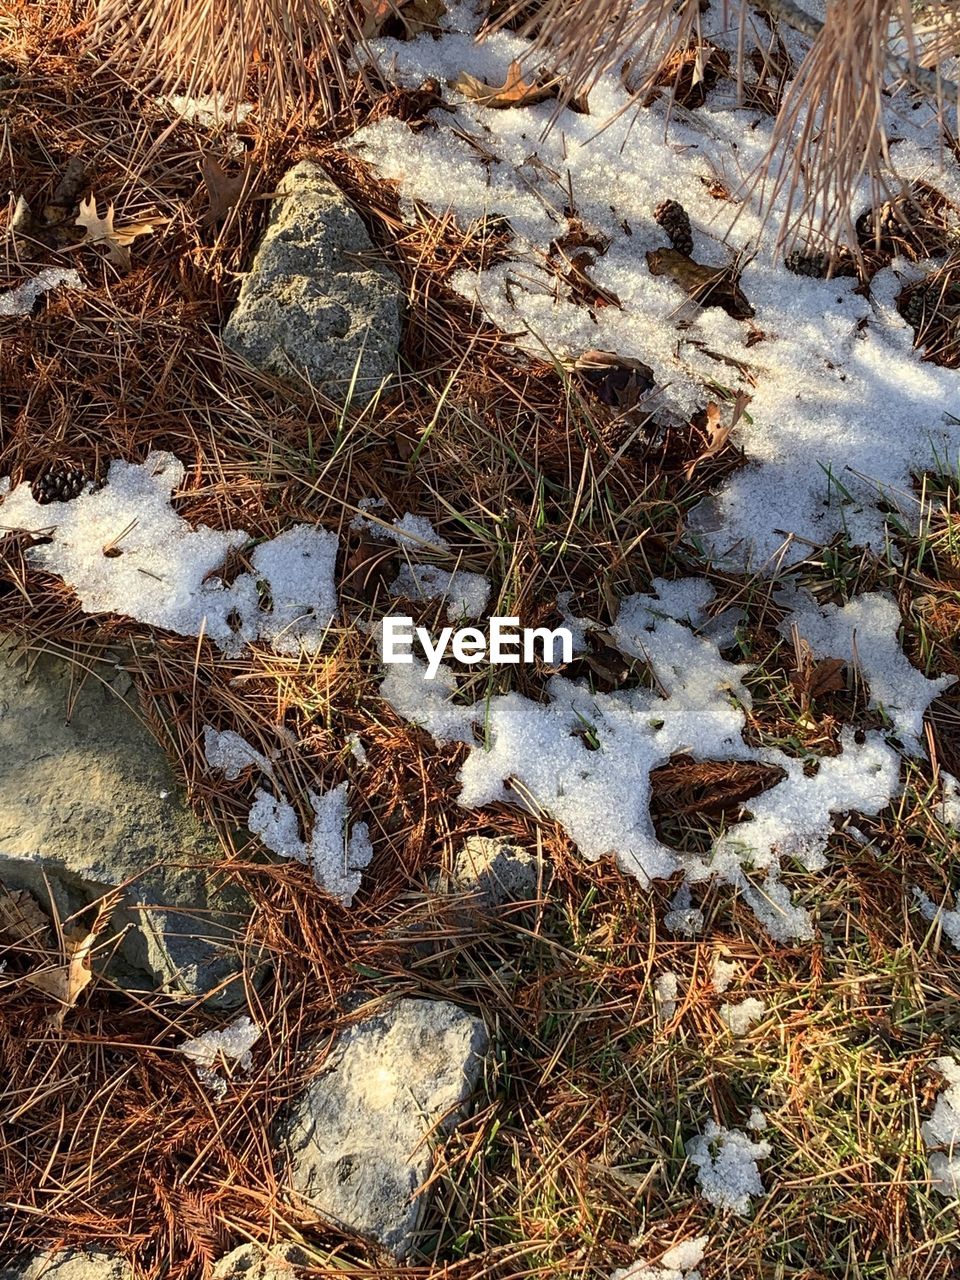 HIGH ANGLE VIEW OF DRY PLANTS ON SNOW FIELD